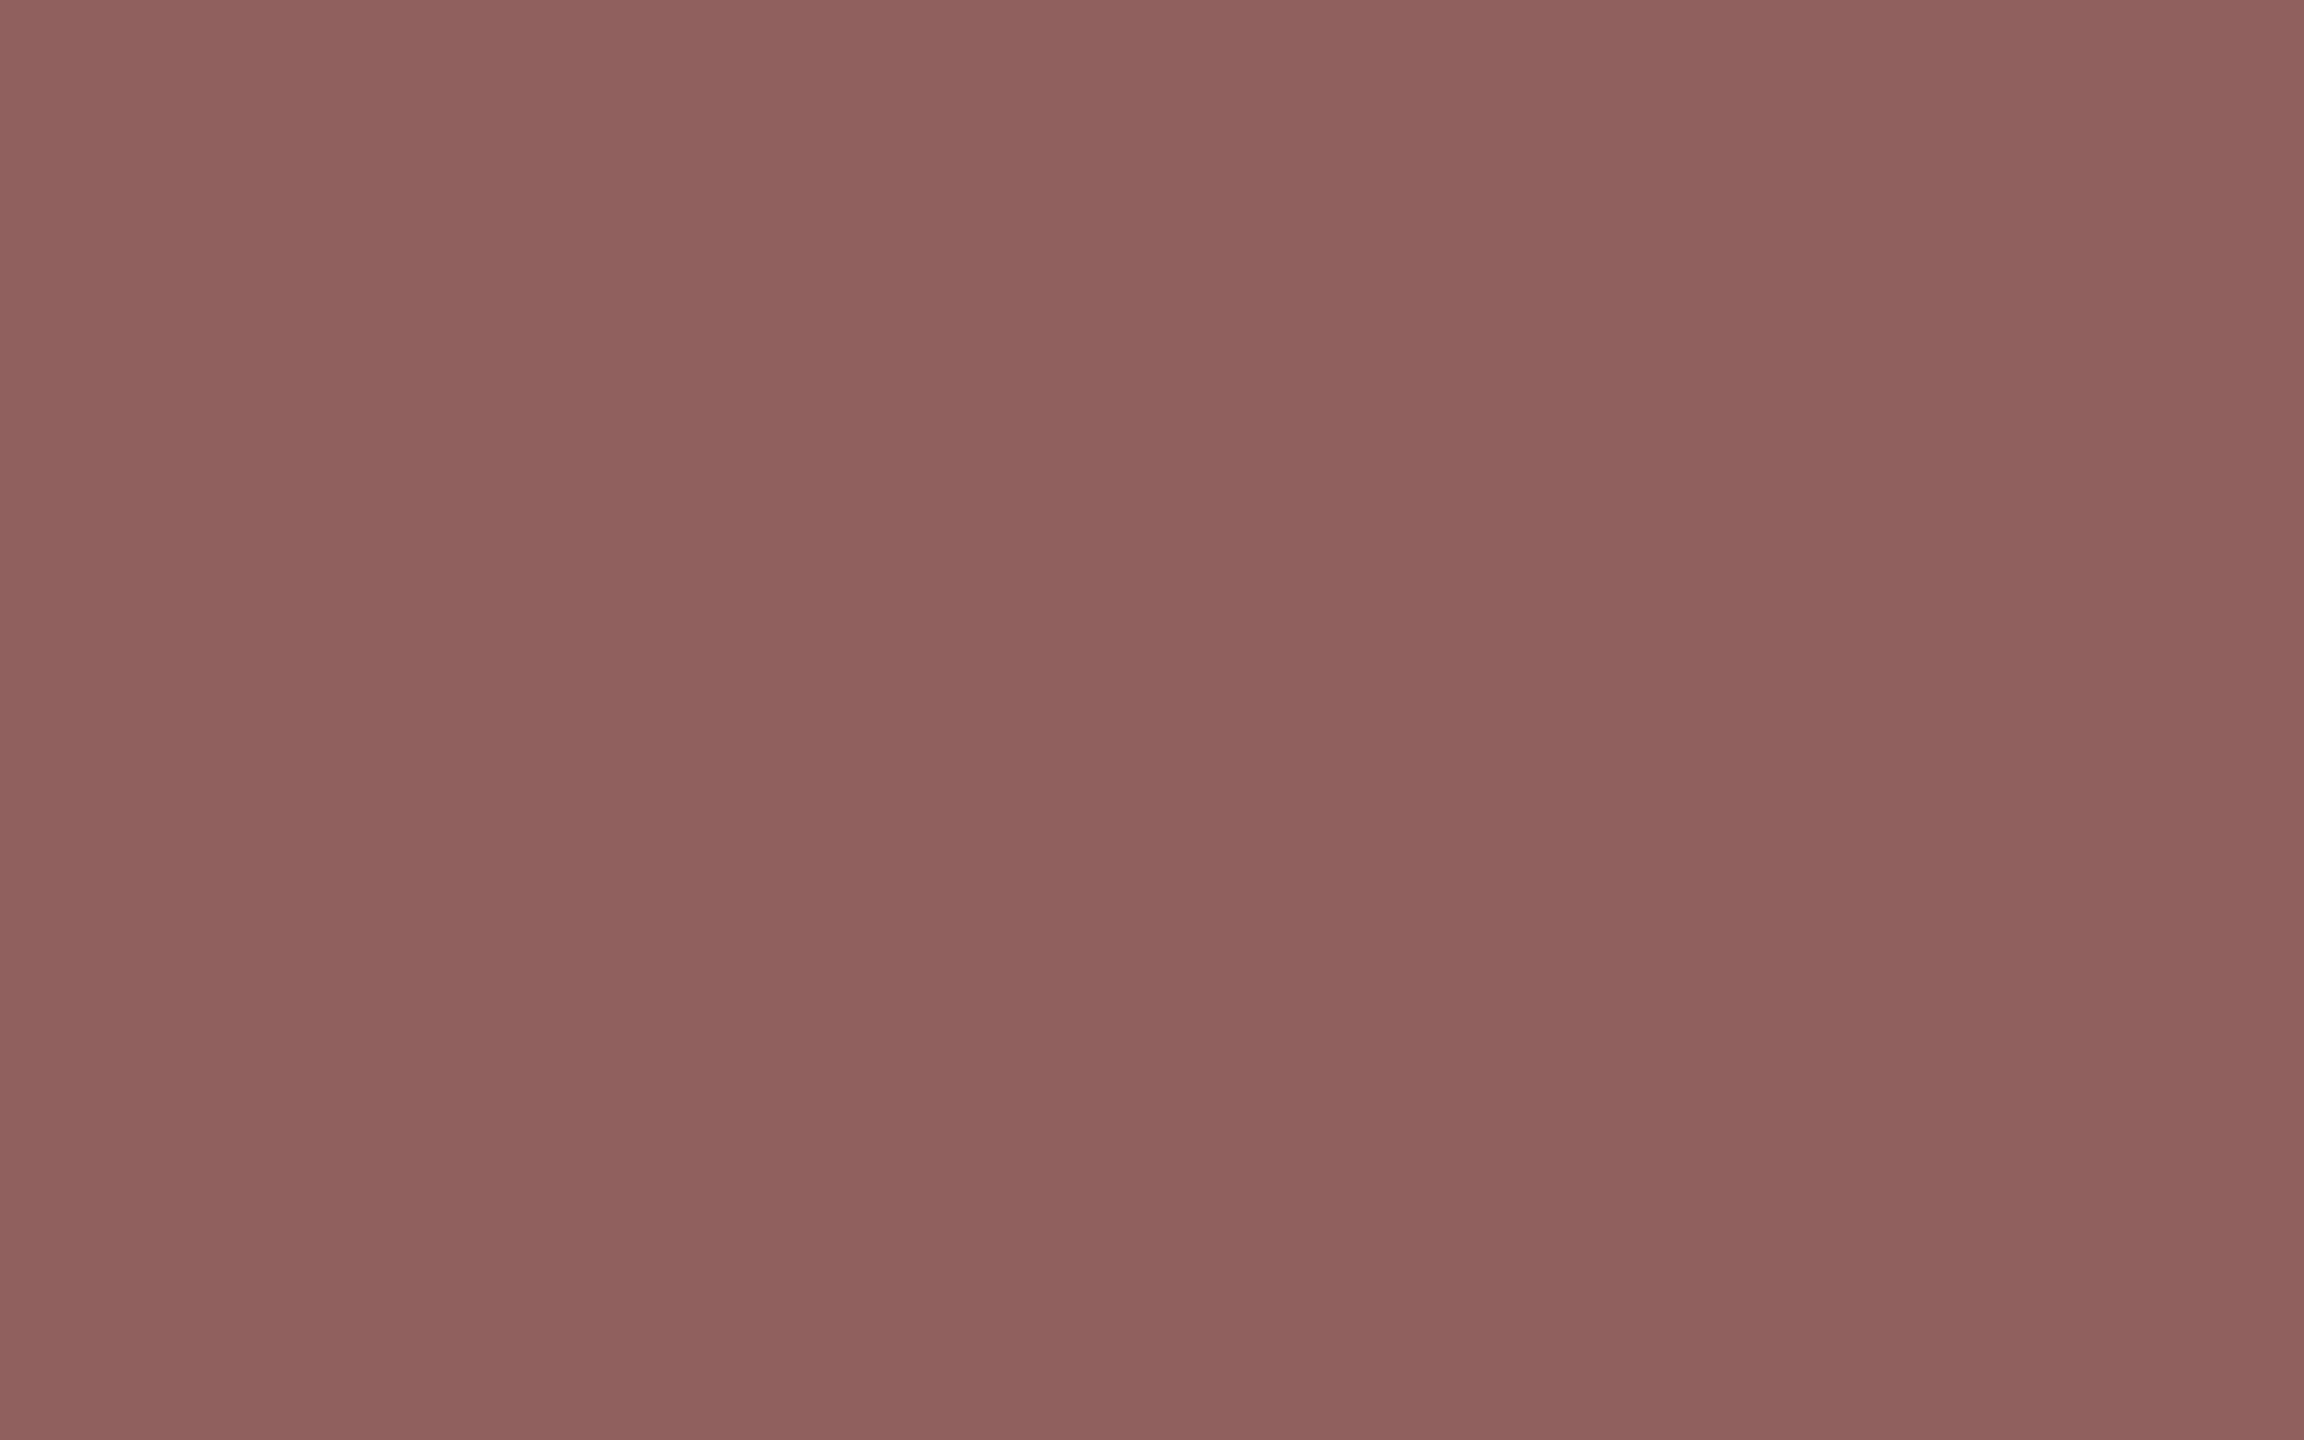 2304x1440 Rose Taupe Solid Color Background